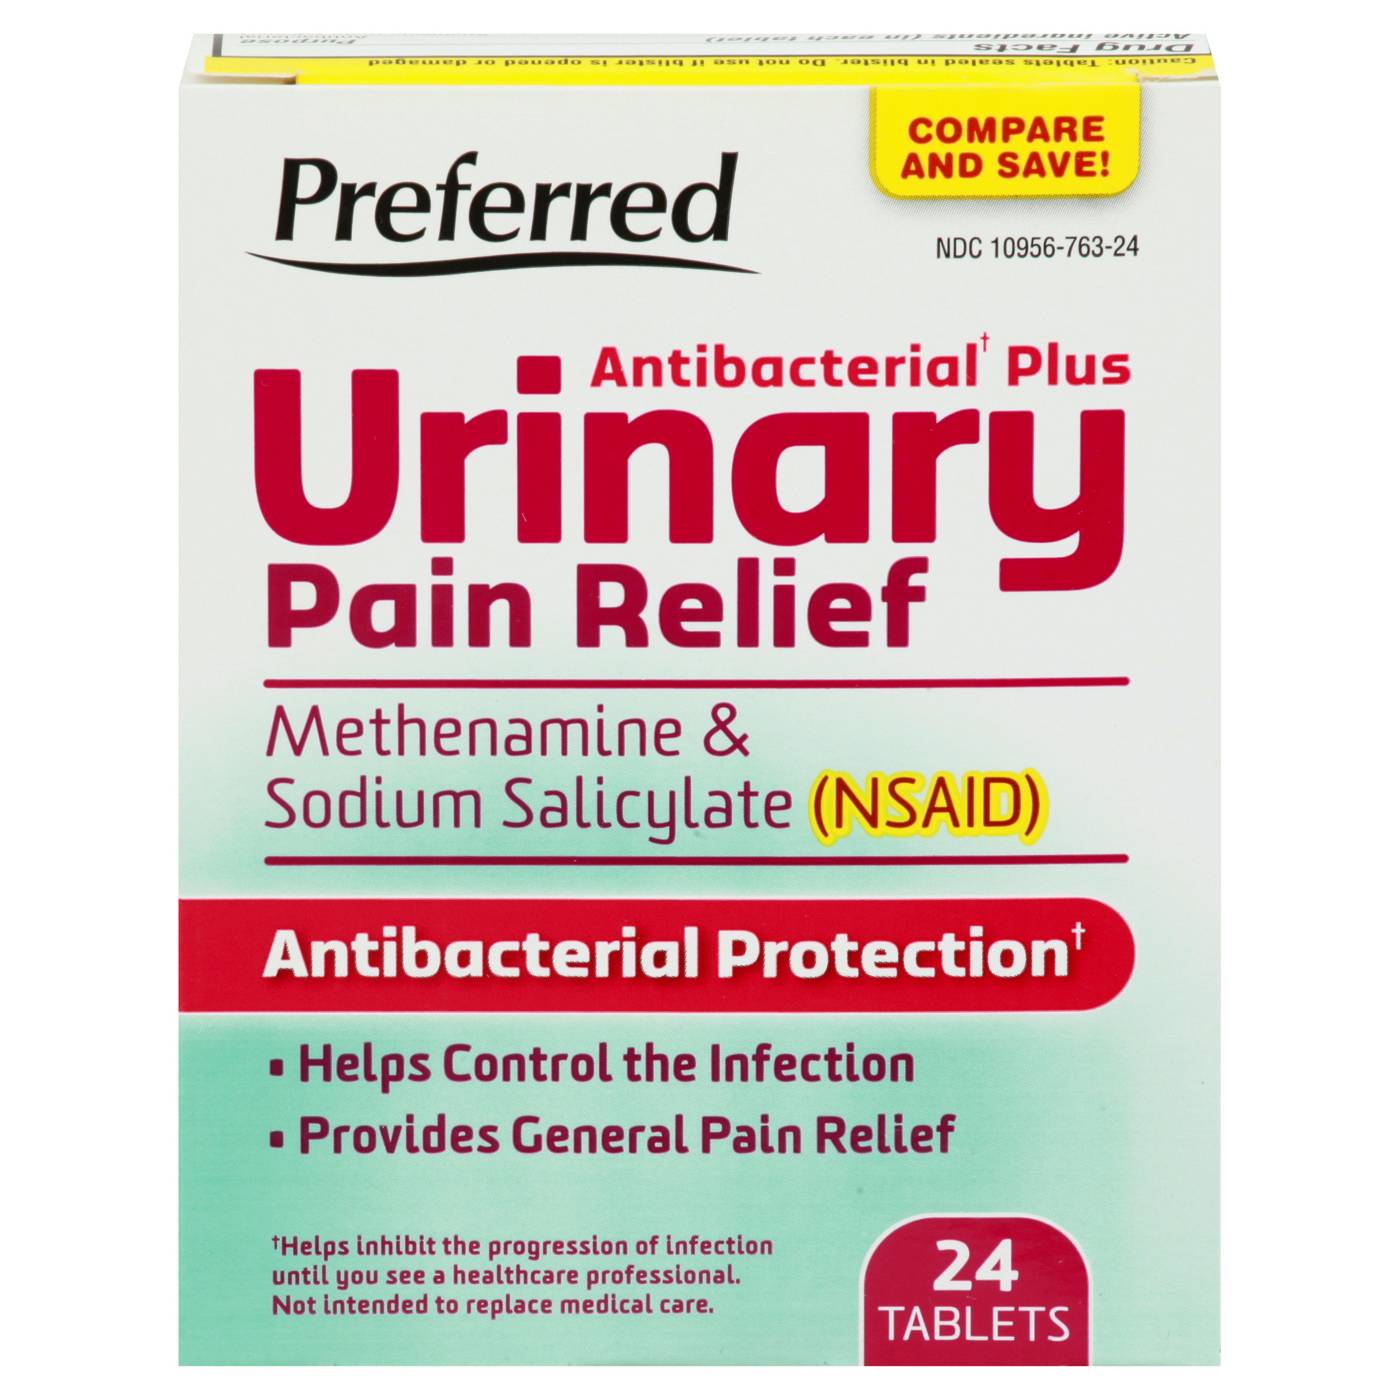 Preferred Antibacterial Plus Urinary Pain Relief; image 1 of 2